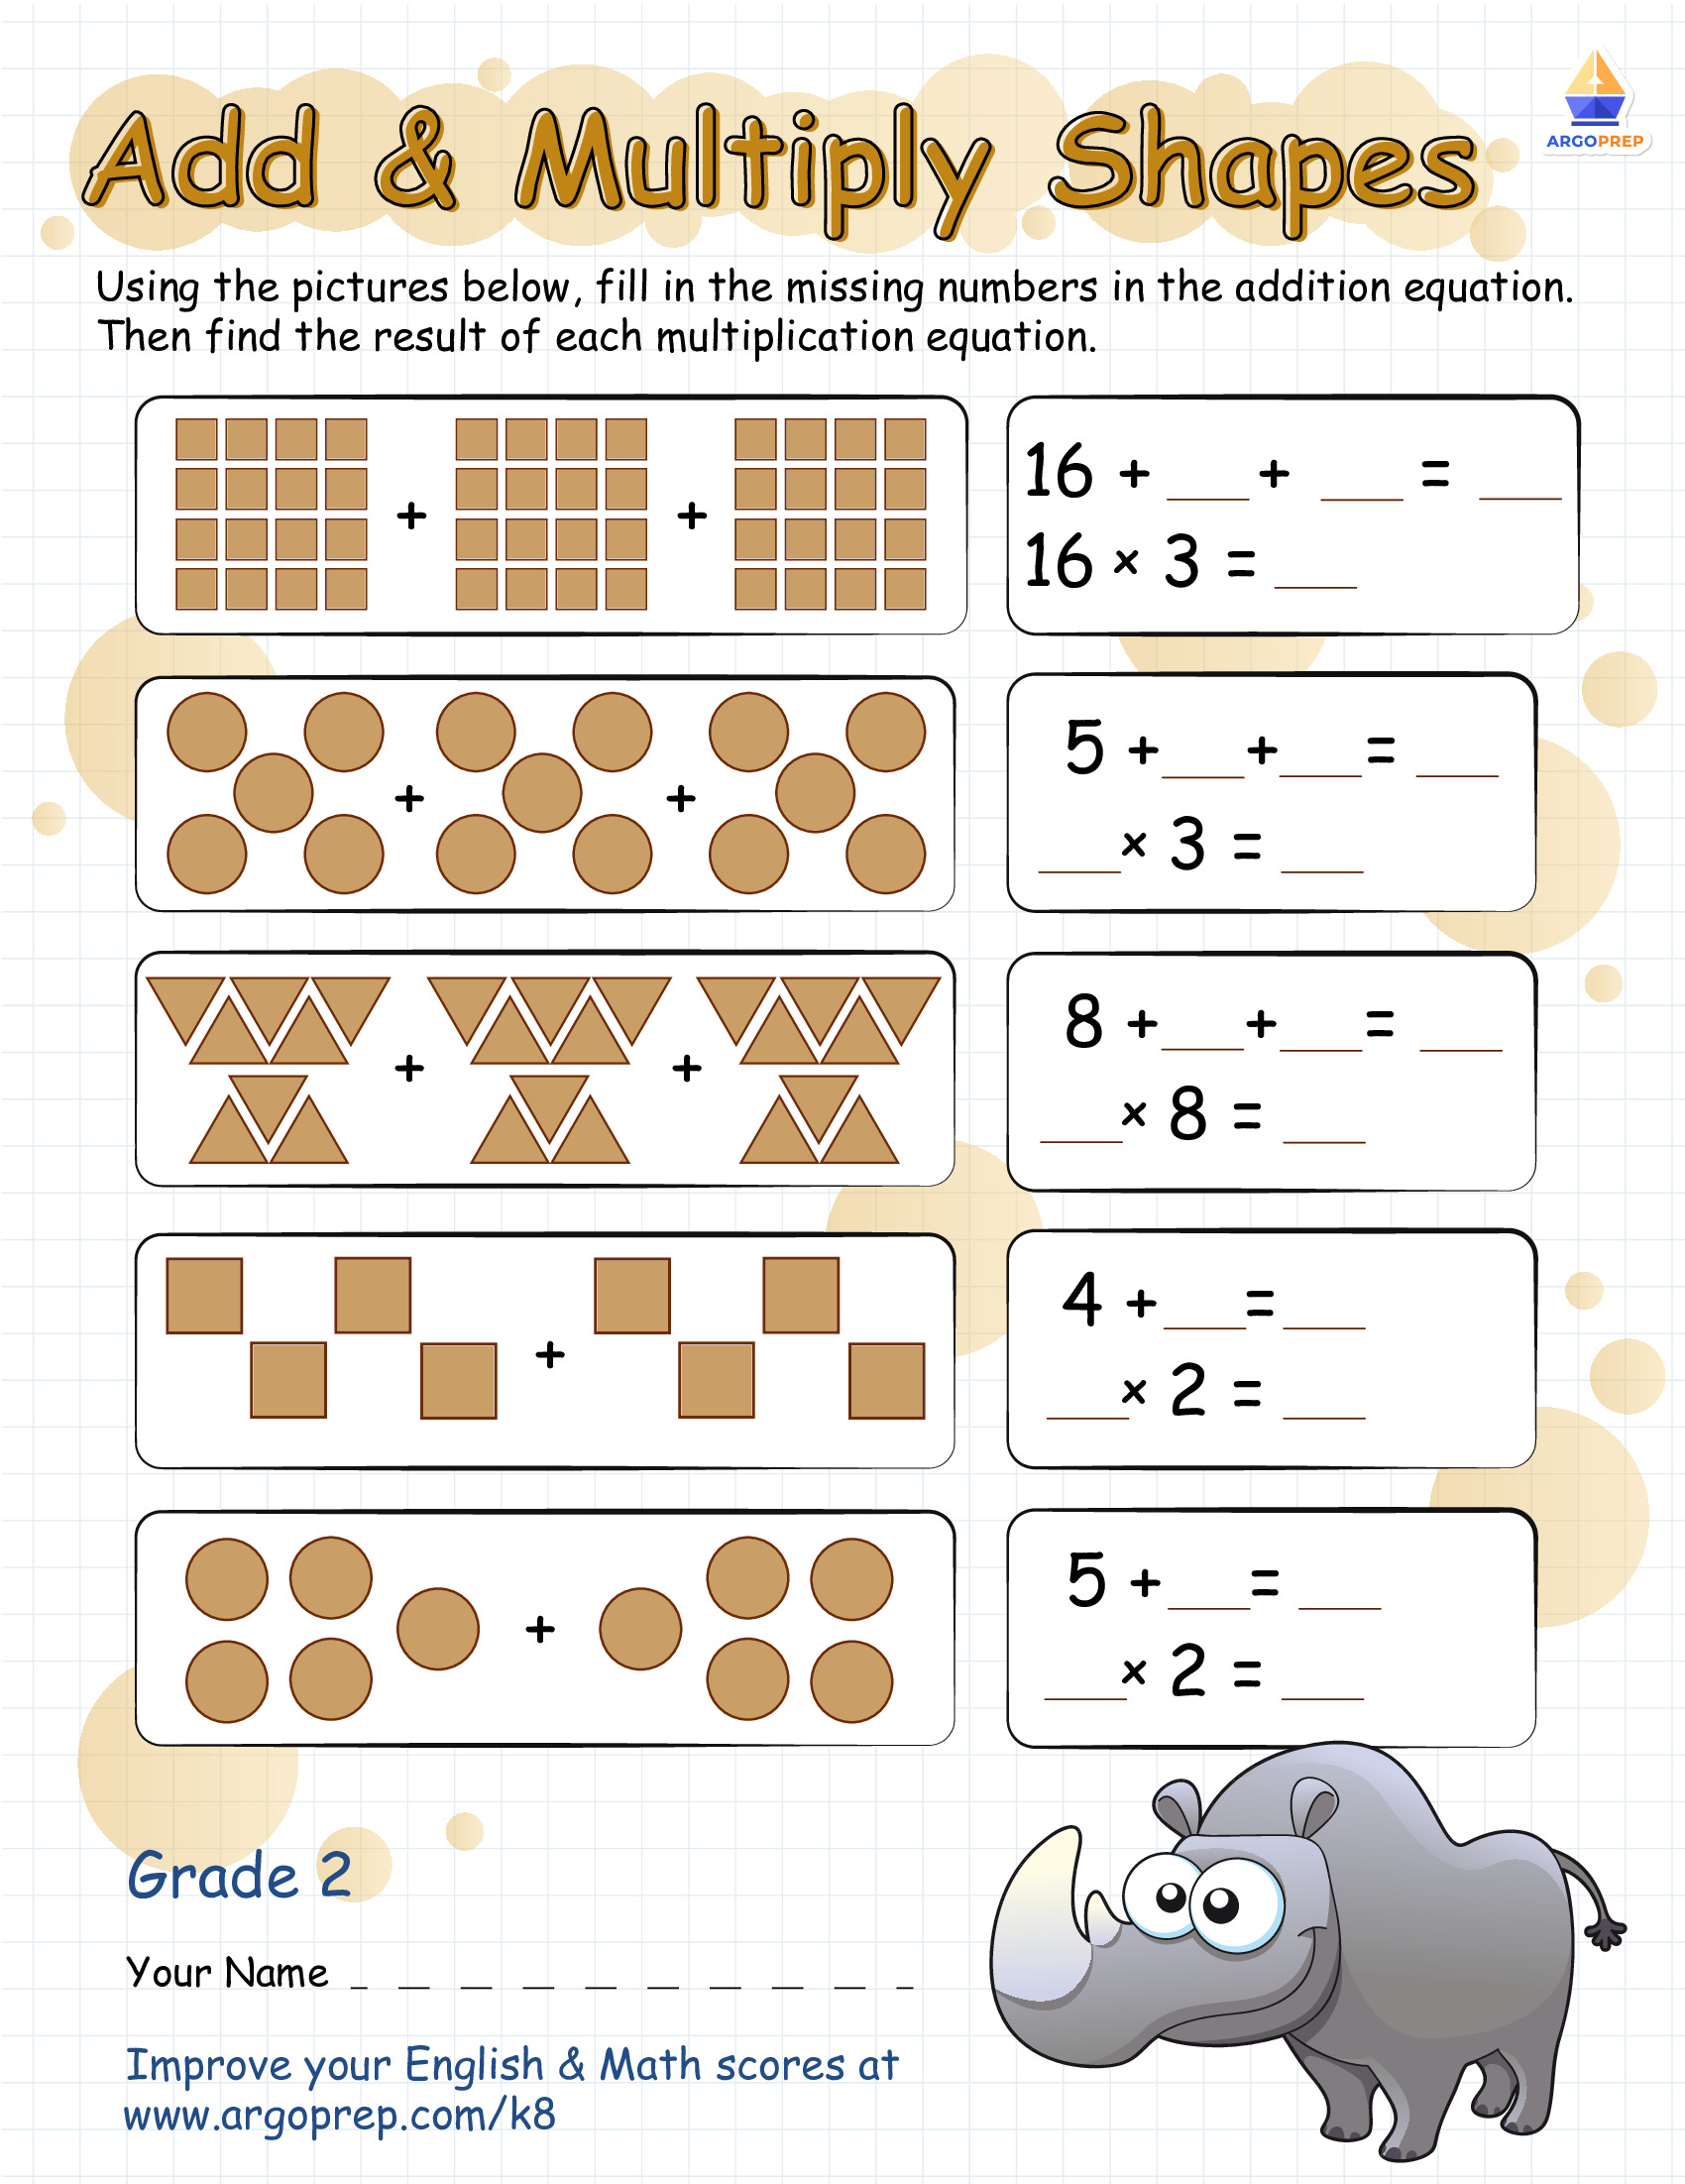 multiplication-as-repeated-addition-worksheets-with-pictures